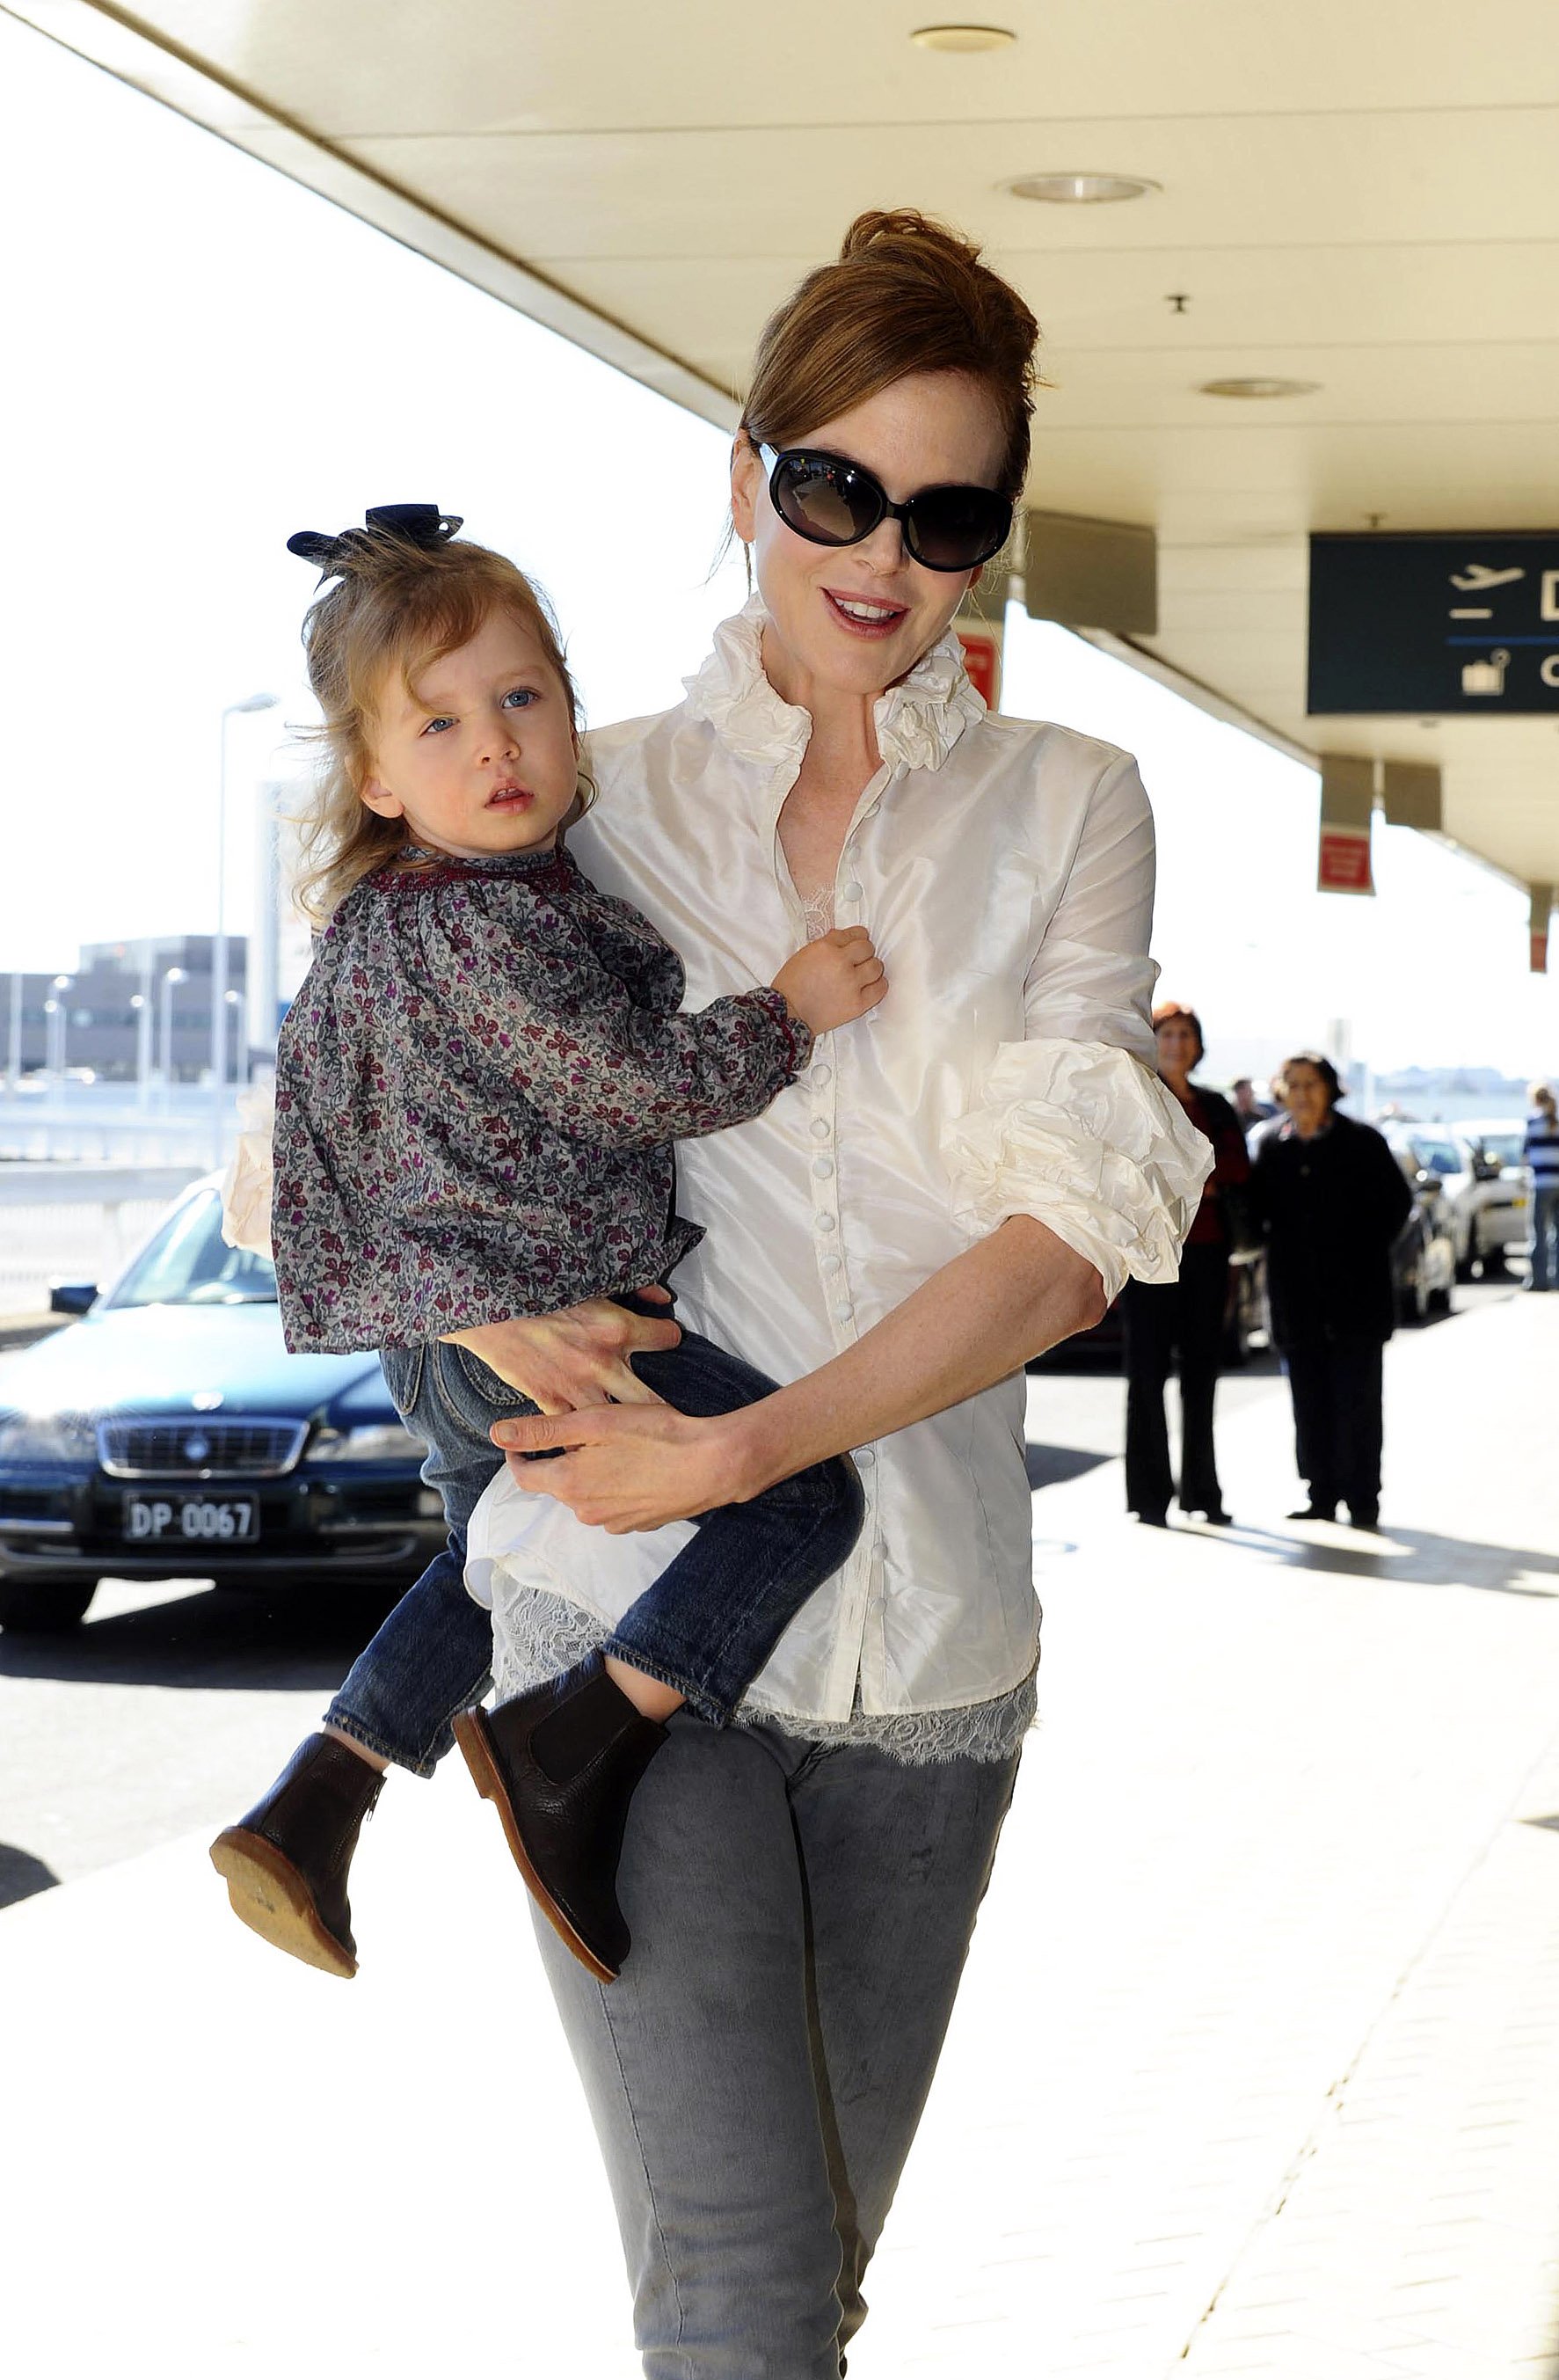 Australian actress Nicole Kidman and her daughter Sunday Rose arrive at Sydney airport to board a flight to Los Angeles on June 20, 2010 in Sydney, Australia. | Source: Getty Images